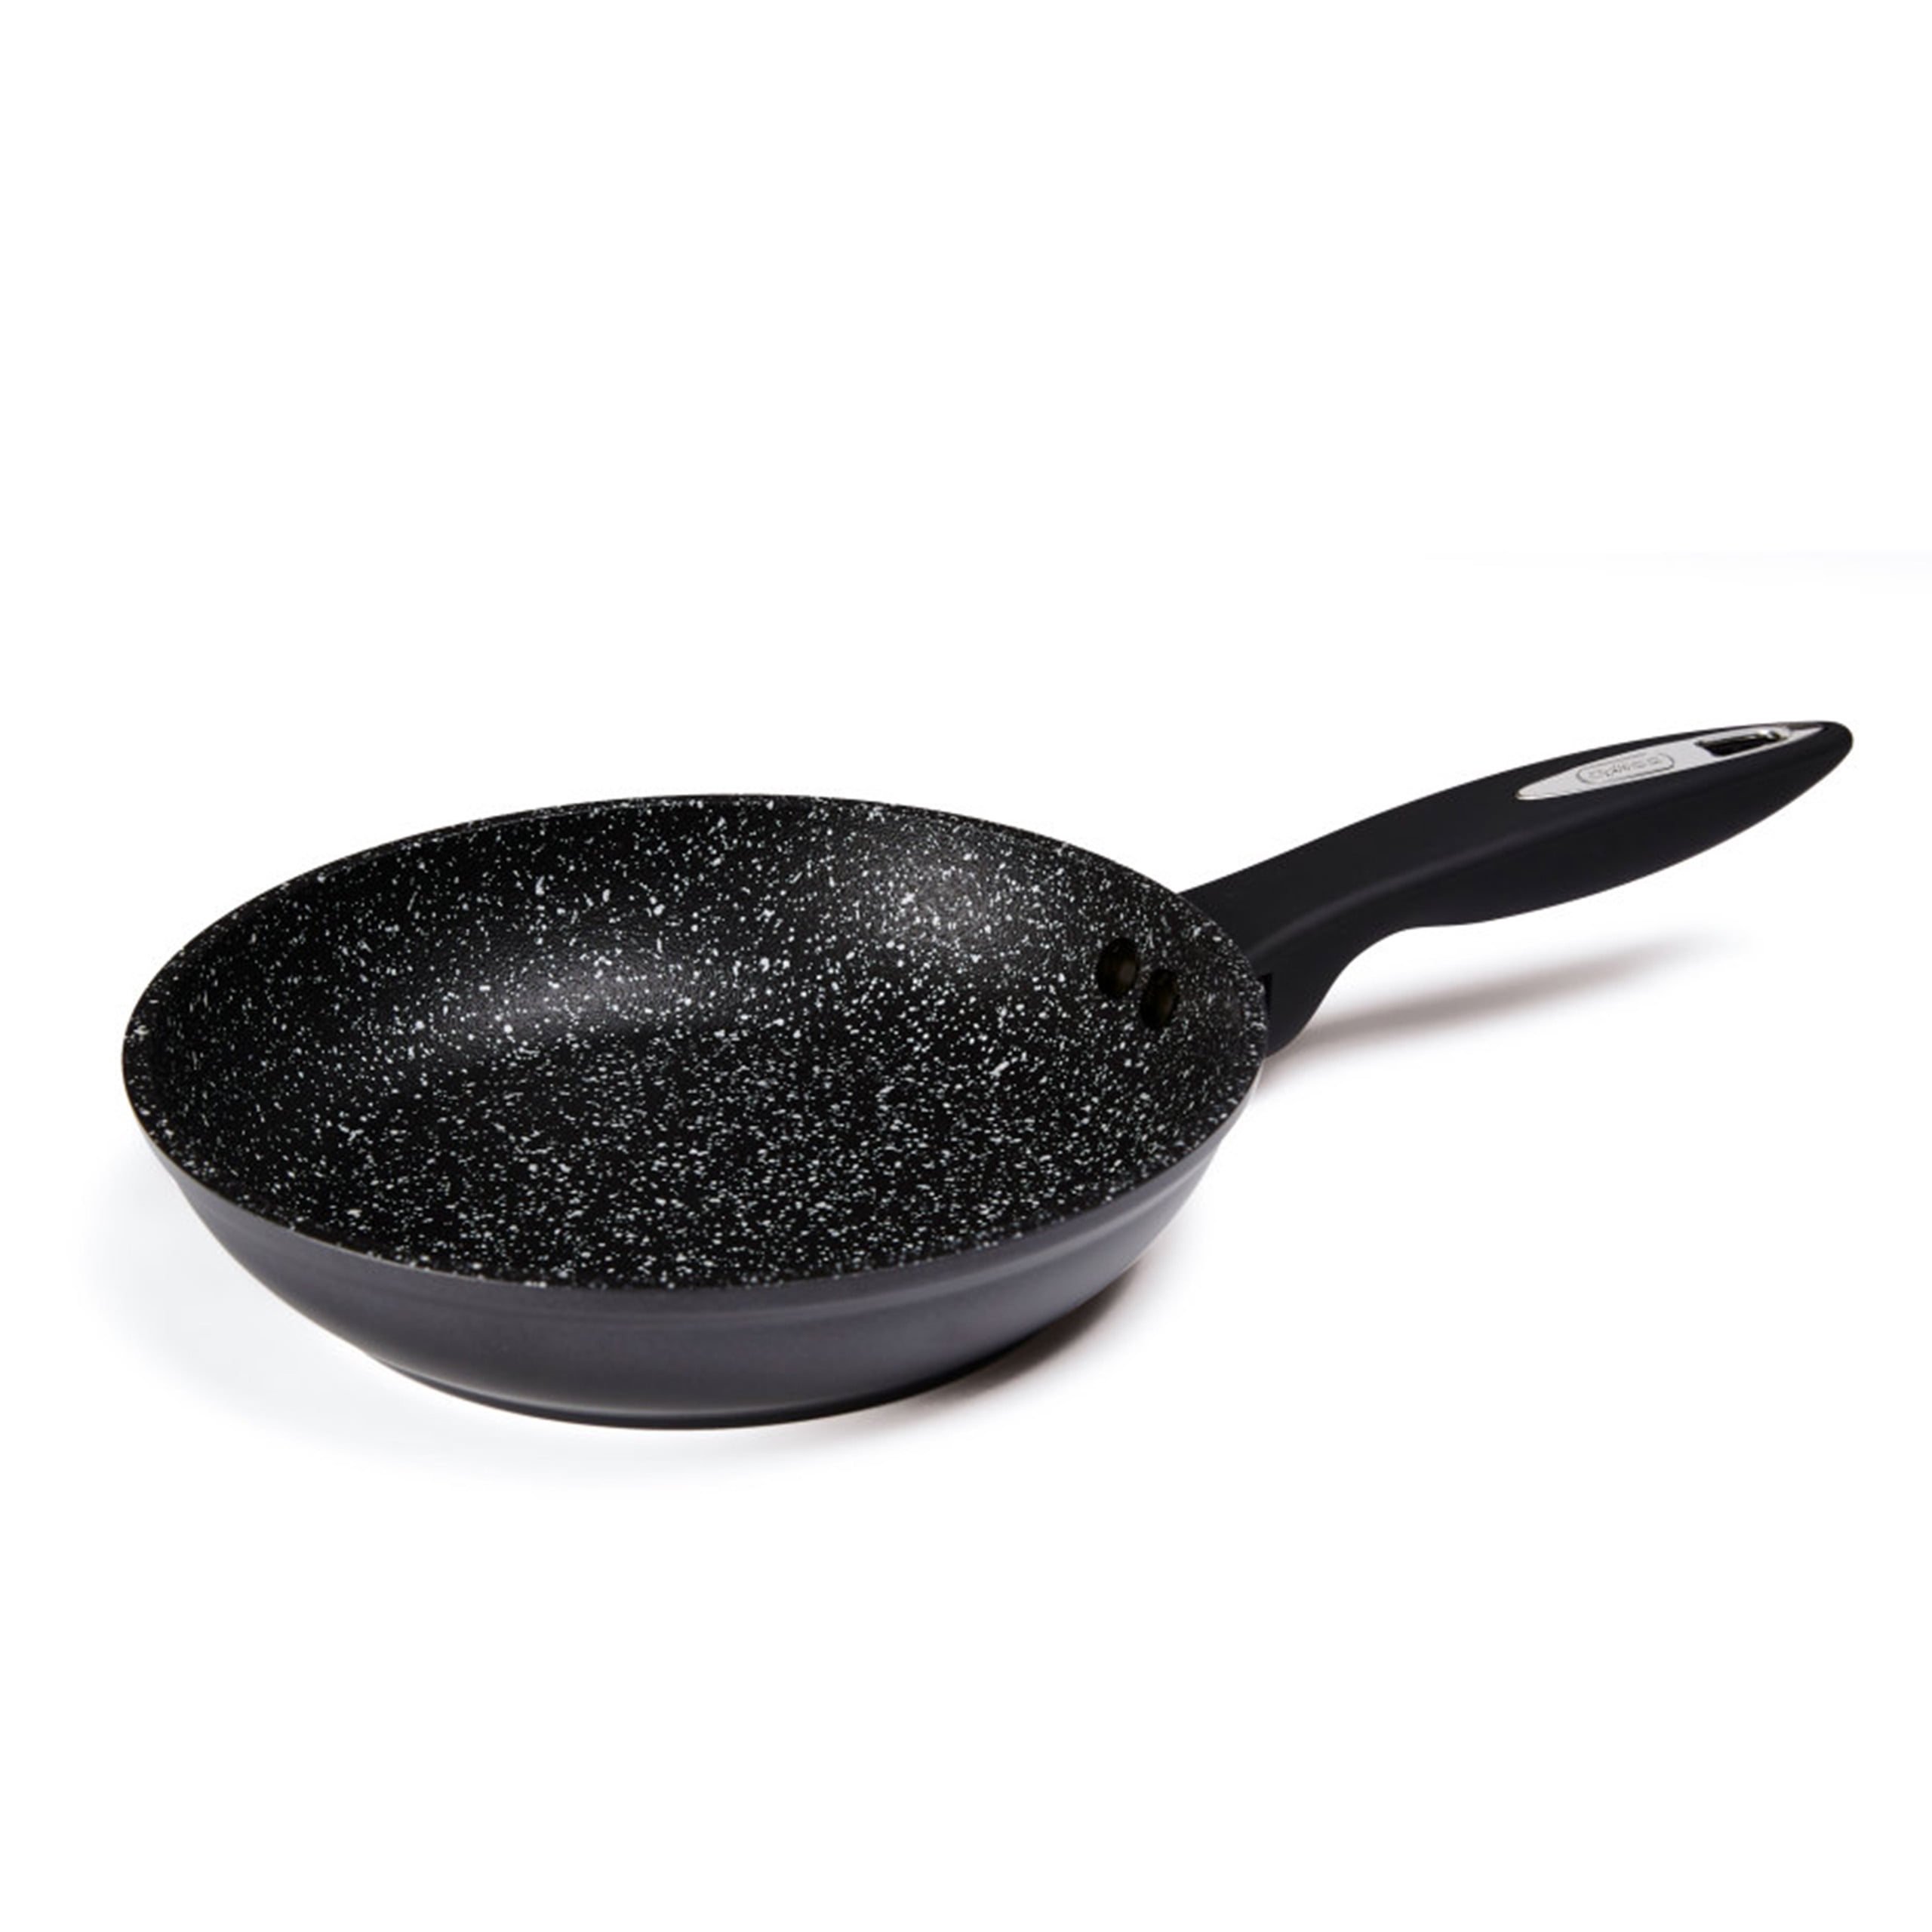 Joie Eggy Mini Fry Pan Stainless Steel Non-stick Frying Pan For